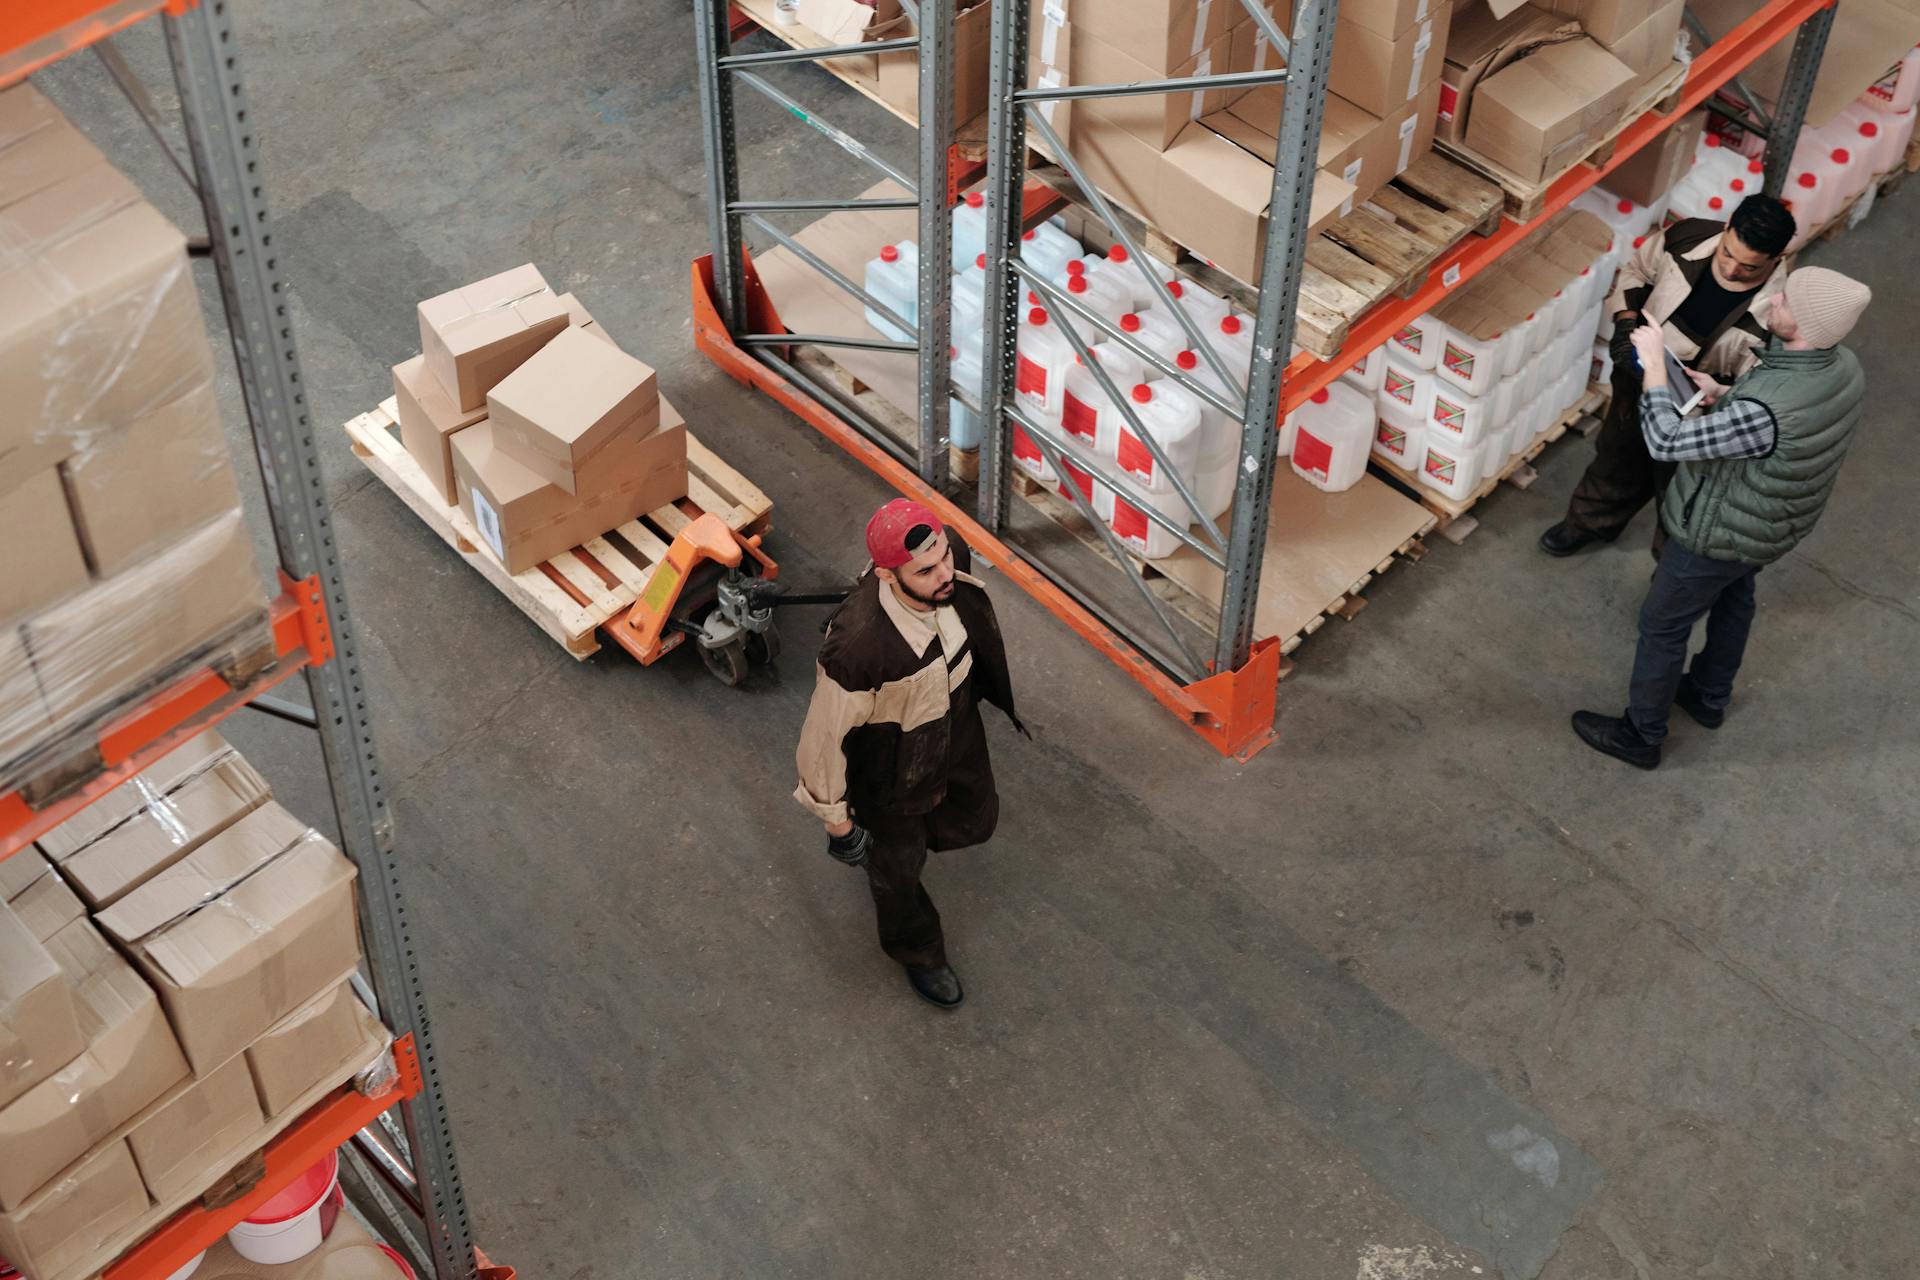 A worker completing the pick and pack fulfillment process by carrying recently packed boxes to a truck on a hydraulic jack.